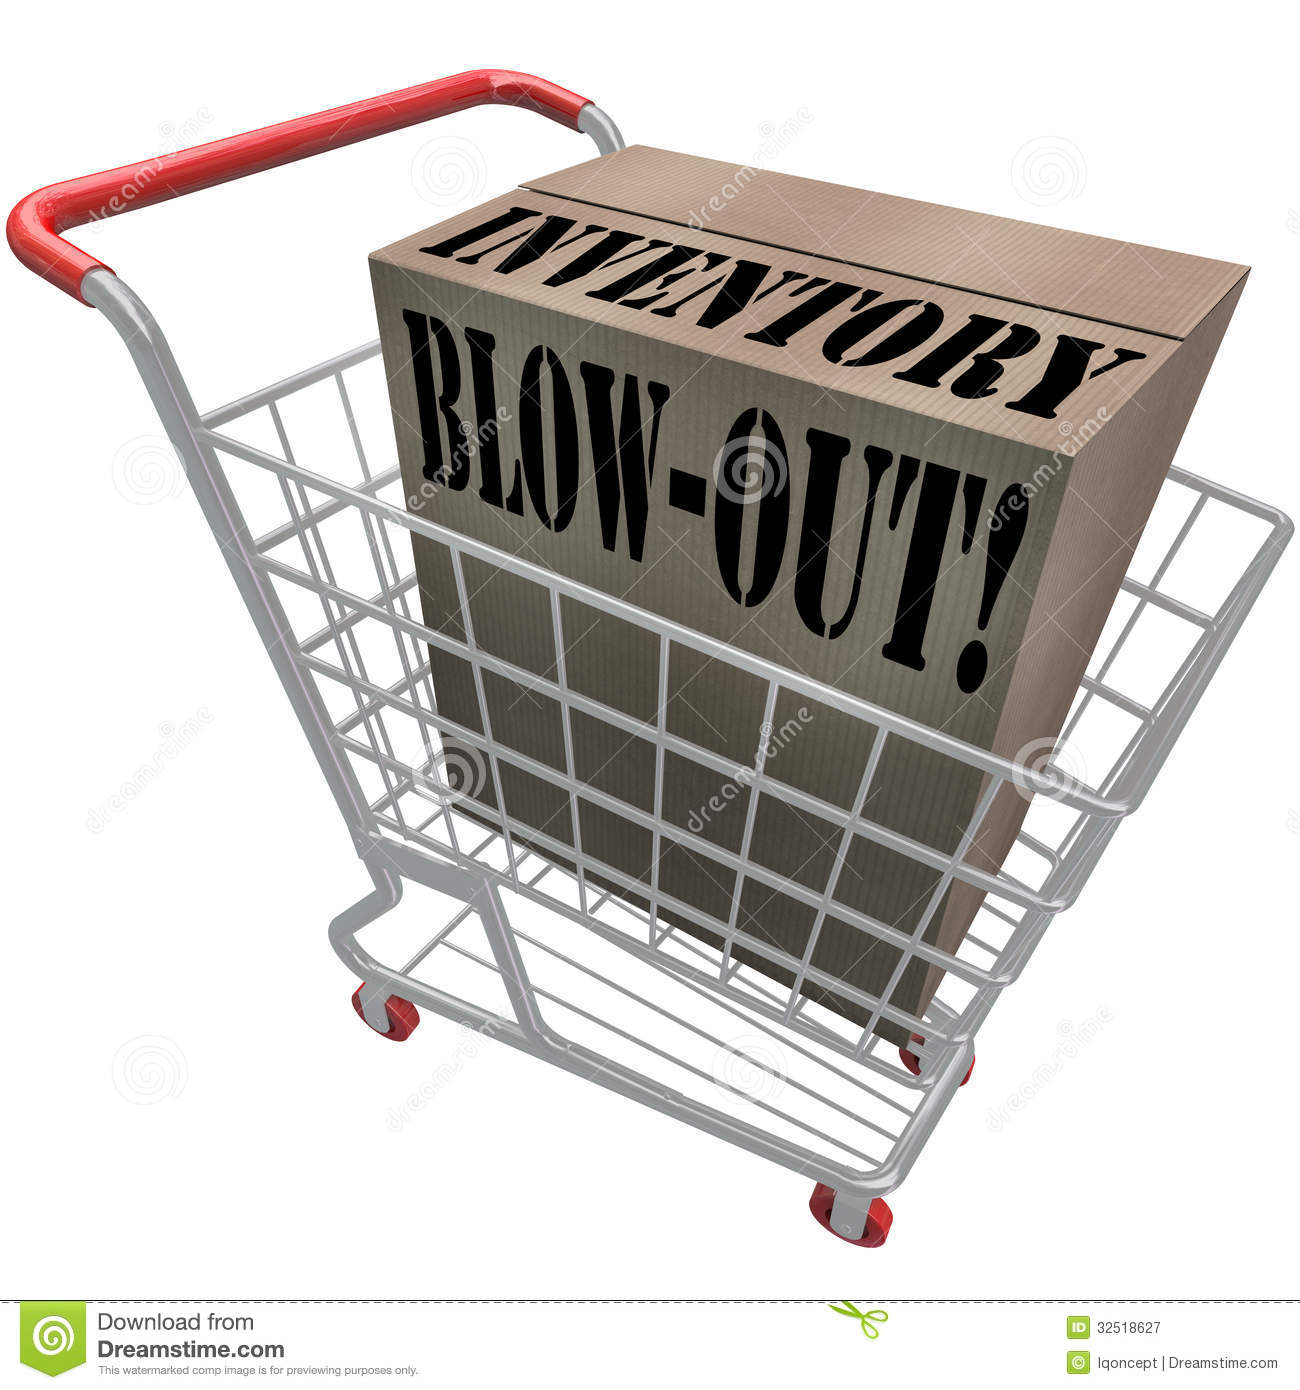 Inventory Blowout Words Cardboard Box Shopping Cart Blow Out Royalty